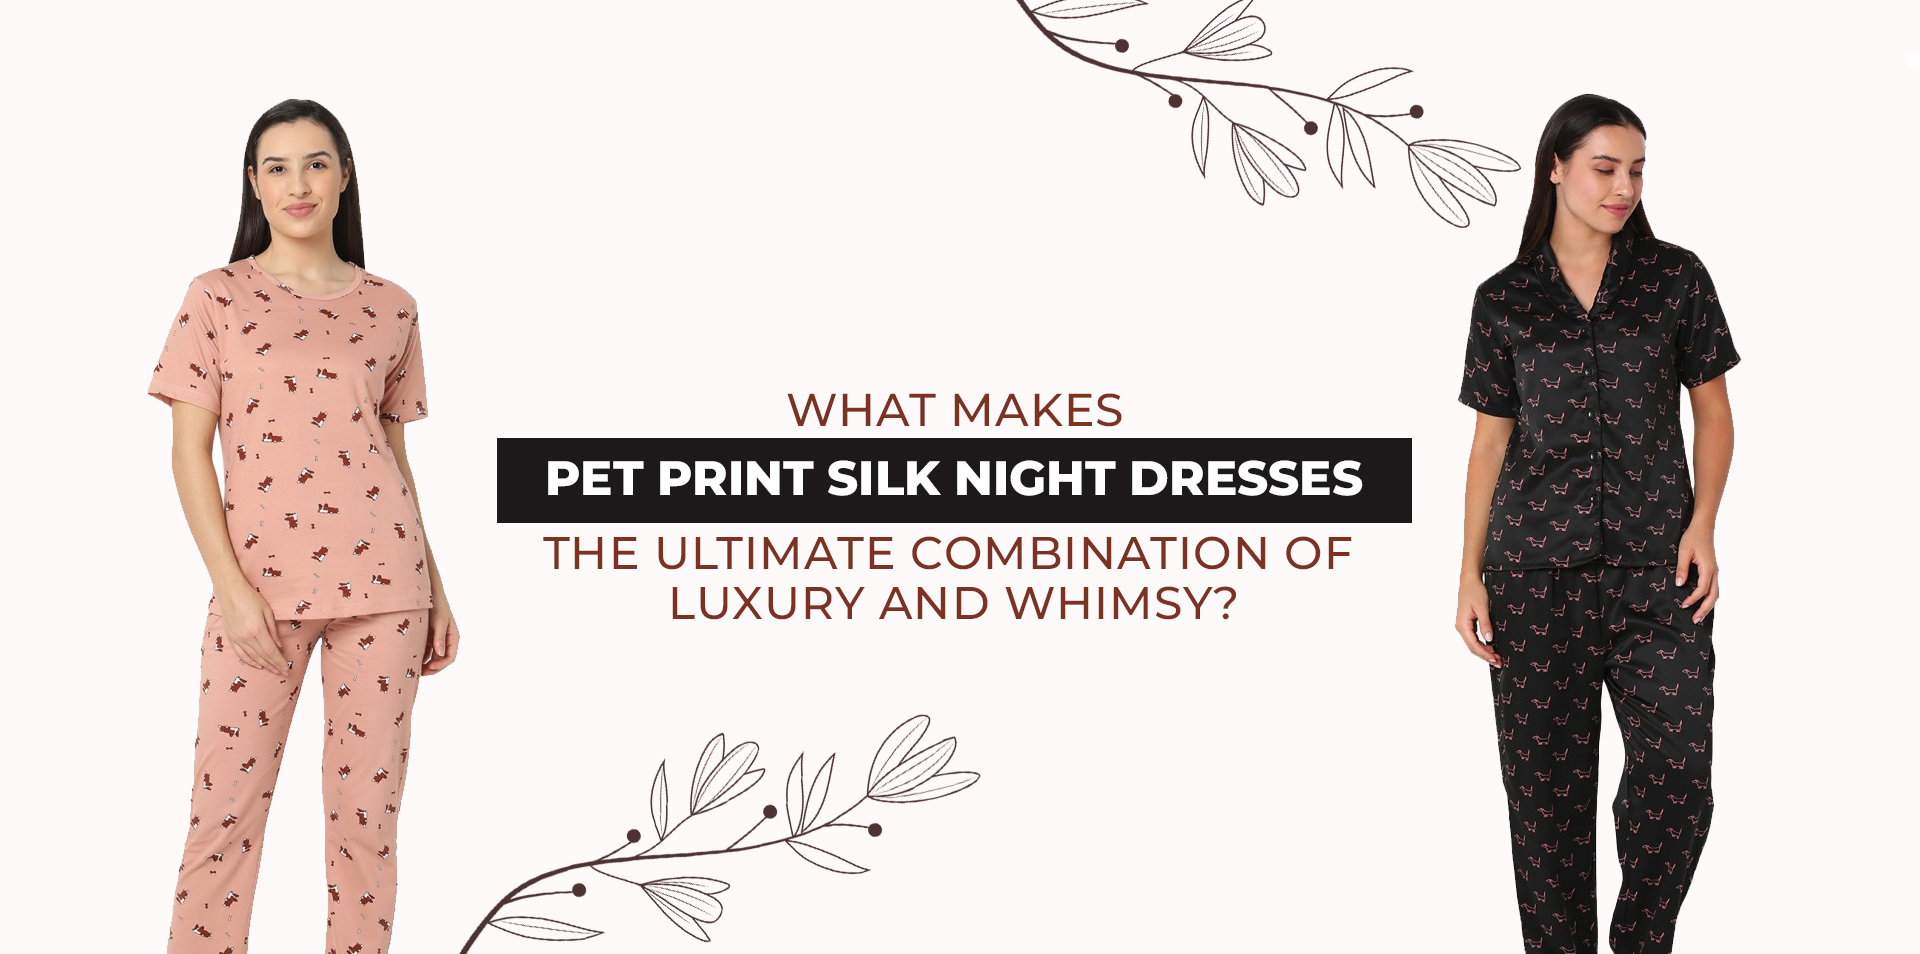 What Makes Pet Print Silk Night Dresses the Ultimate Combination of Luxury and Whimsy?